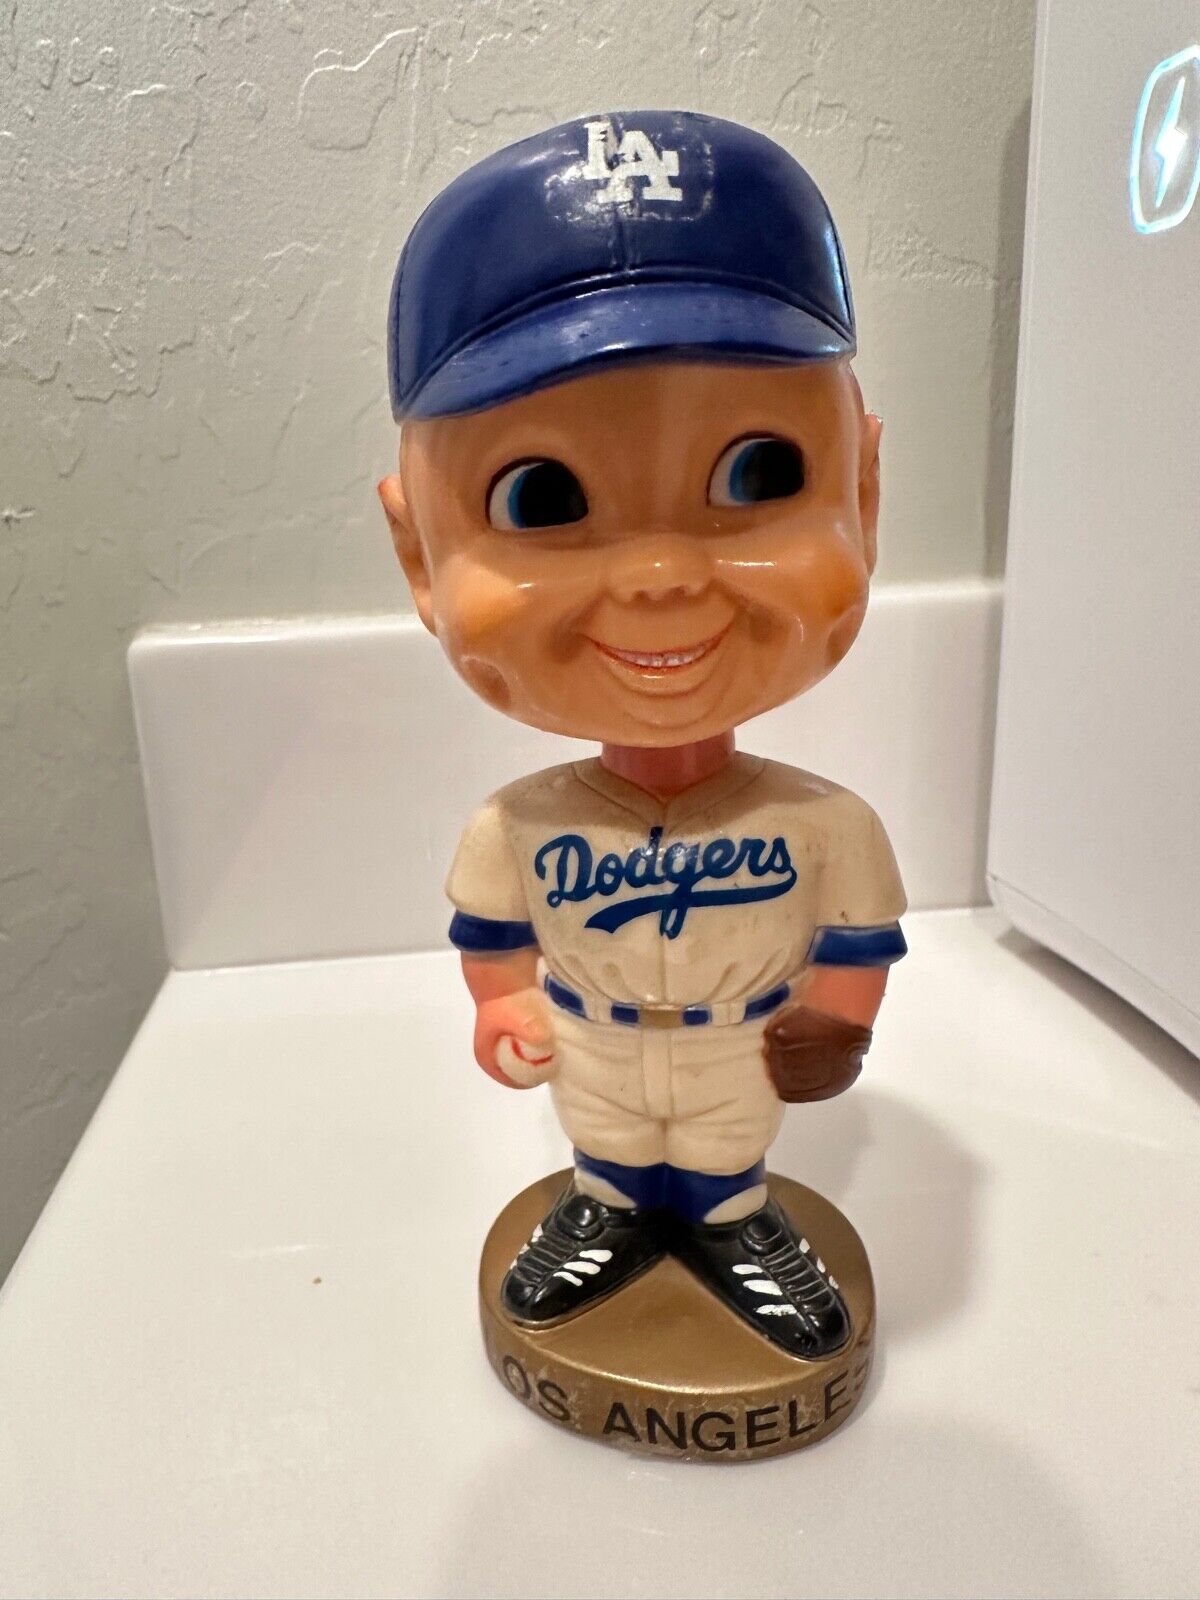 Dodgers,Giants,Yankees,Expos,Astros,Mets,Padres,Phillies and more Bobbleheads